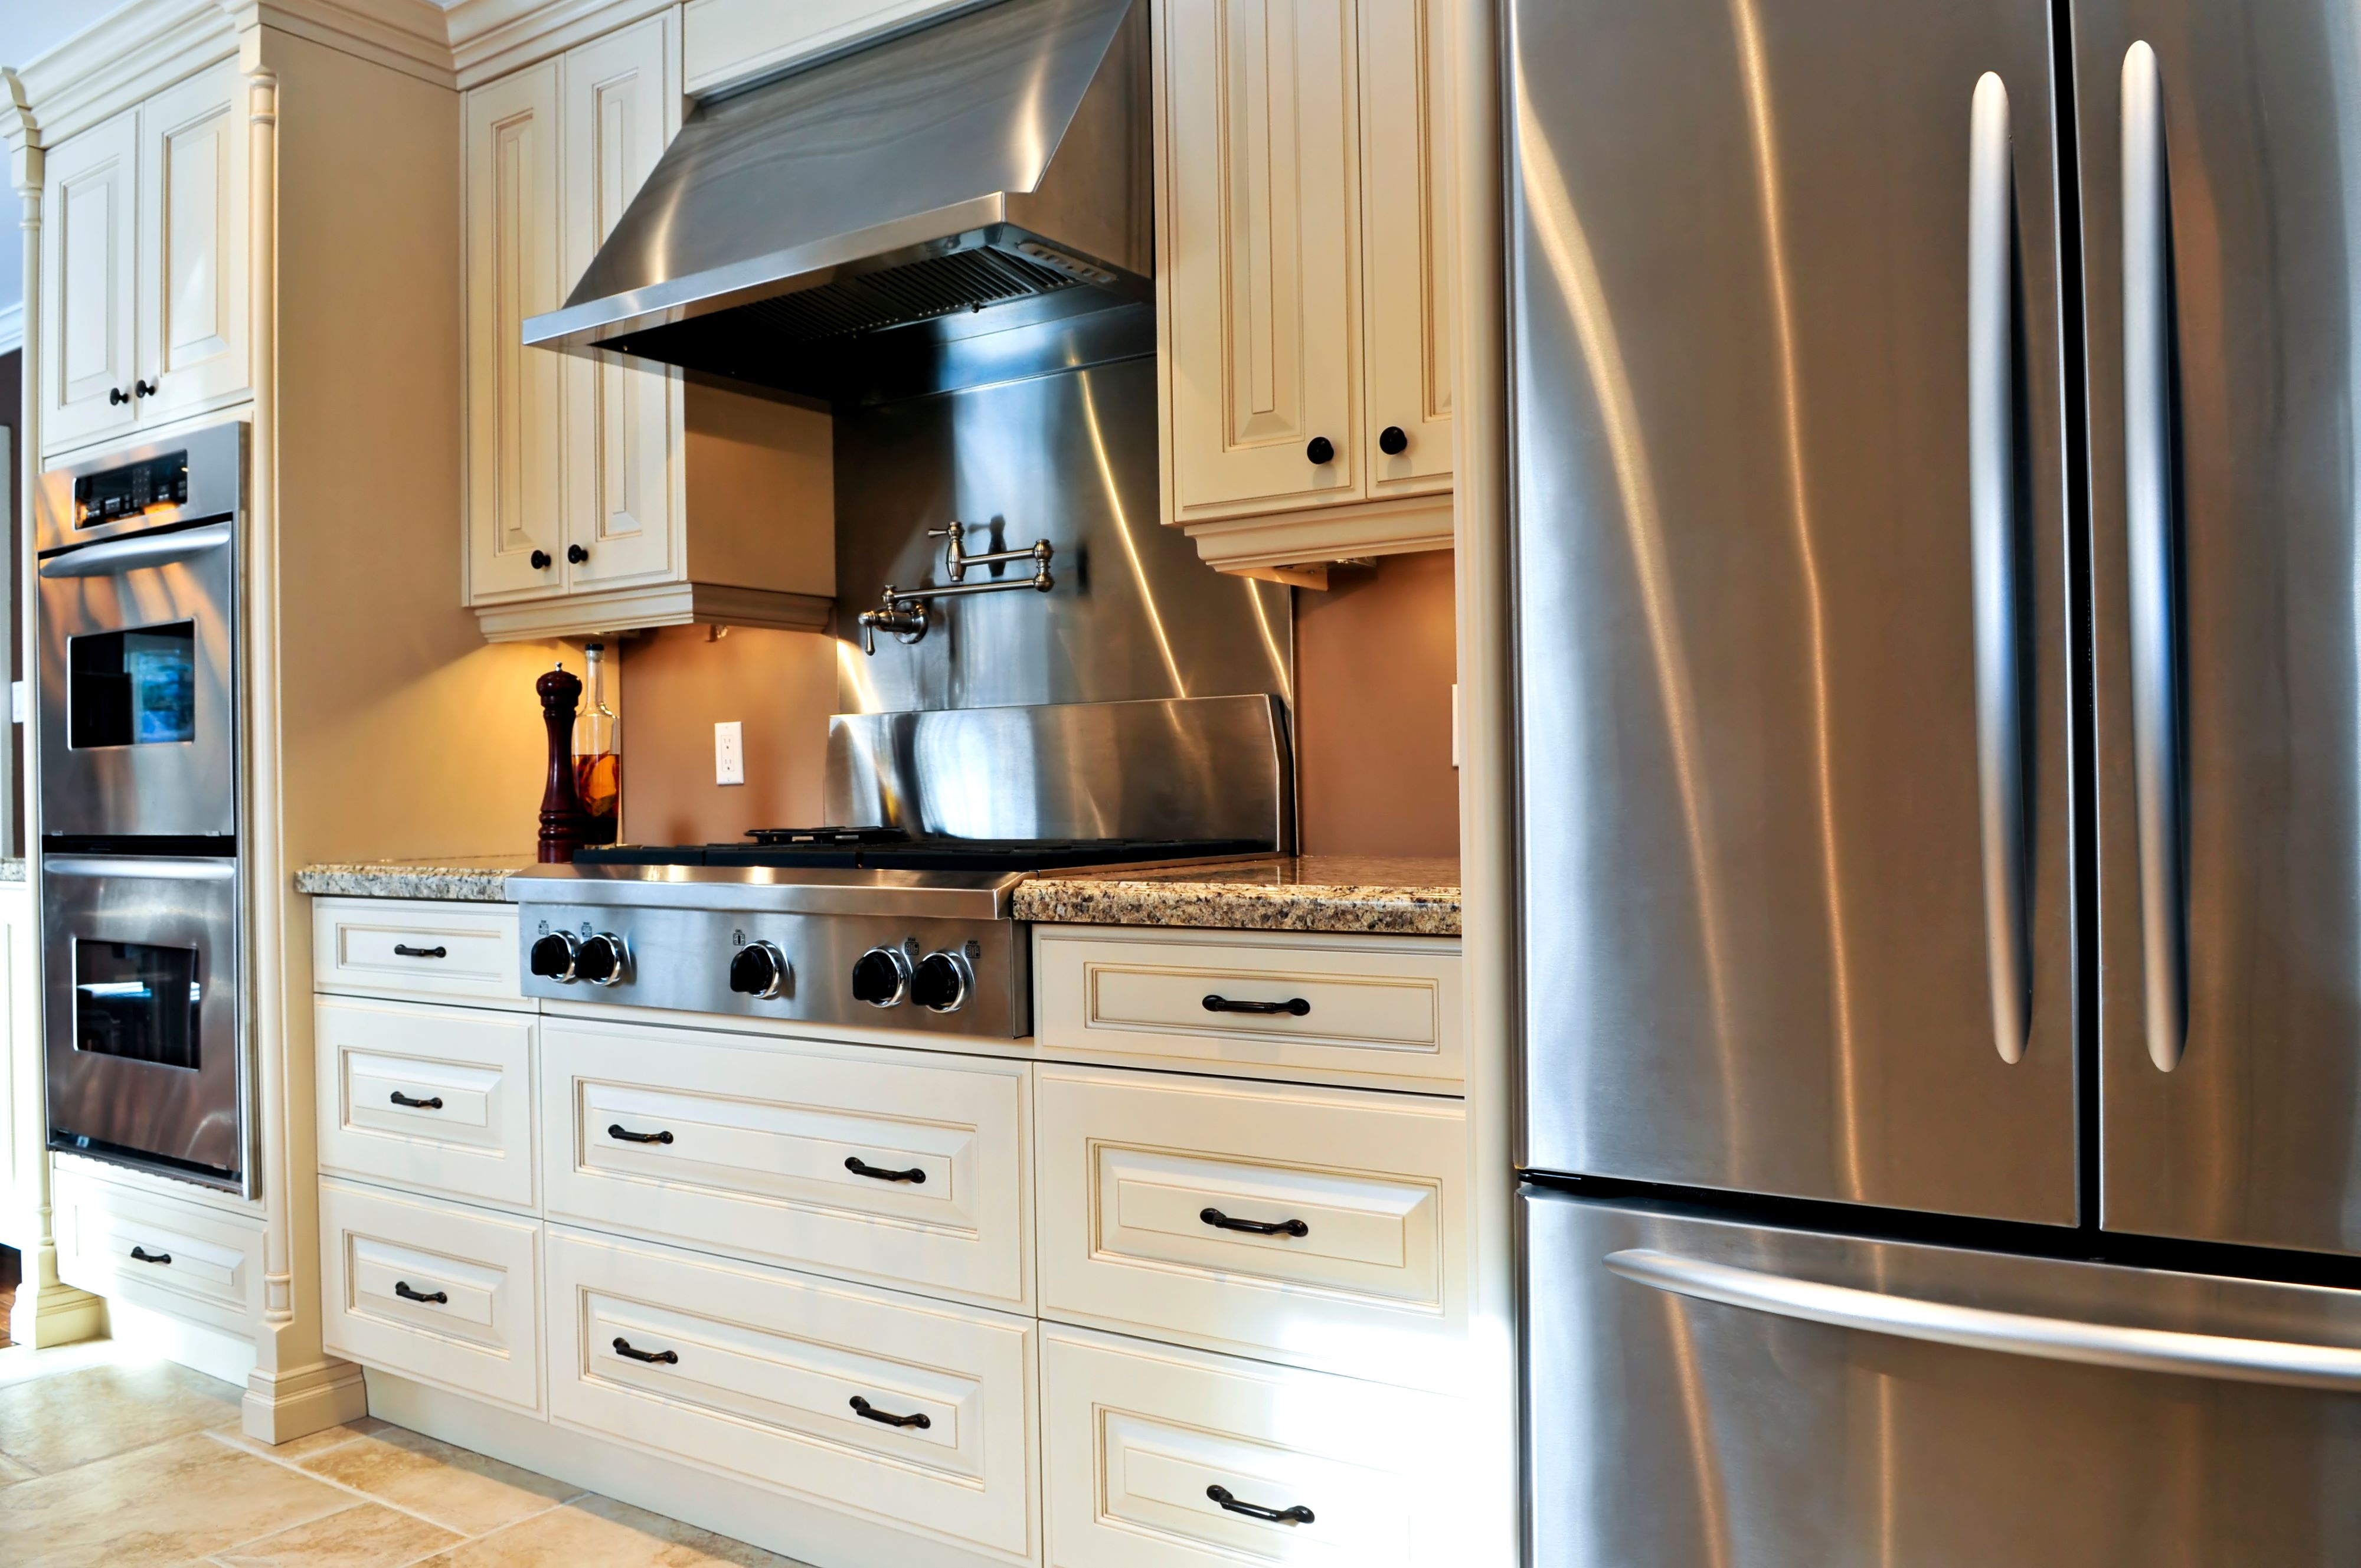 a range hood over a stove in a kitchen